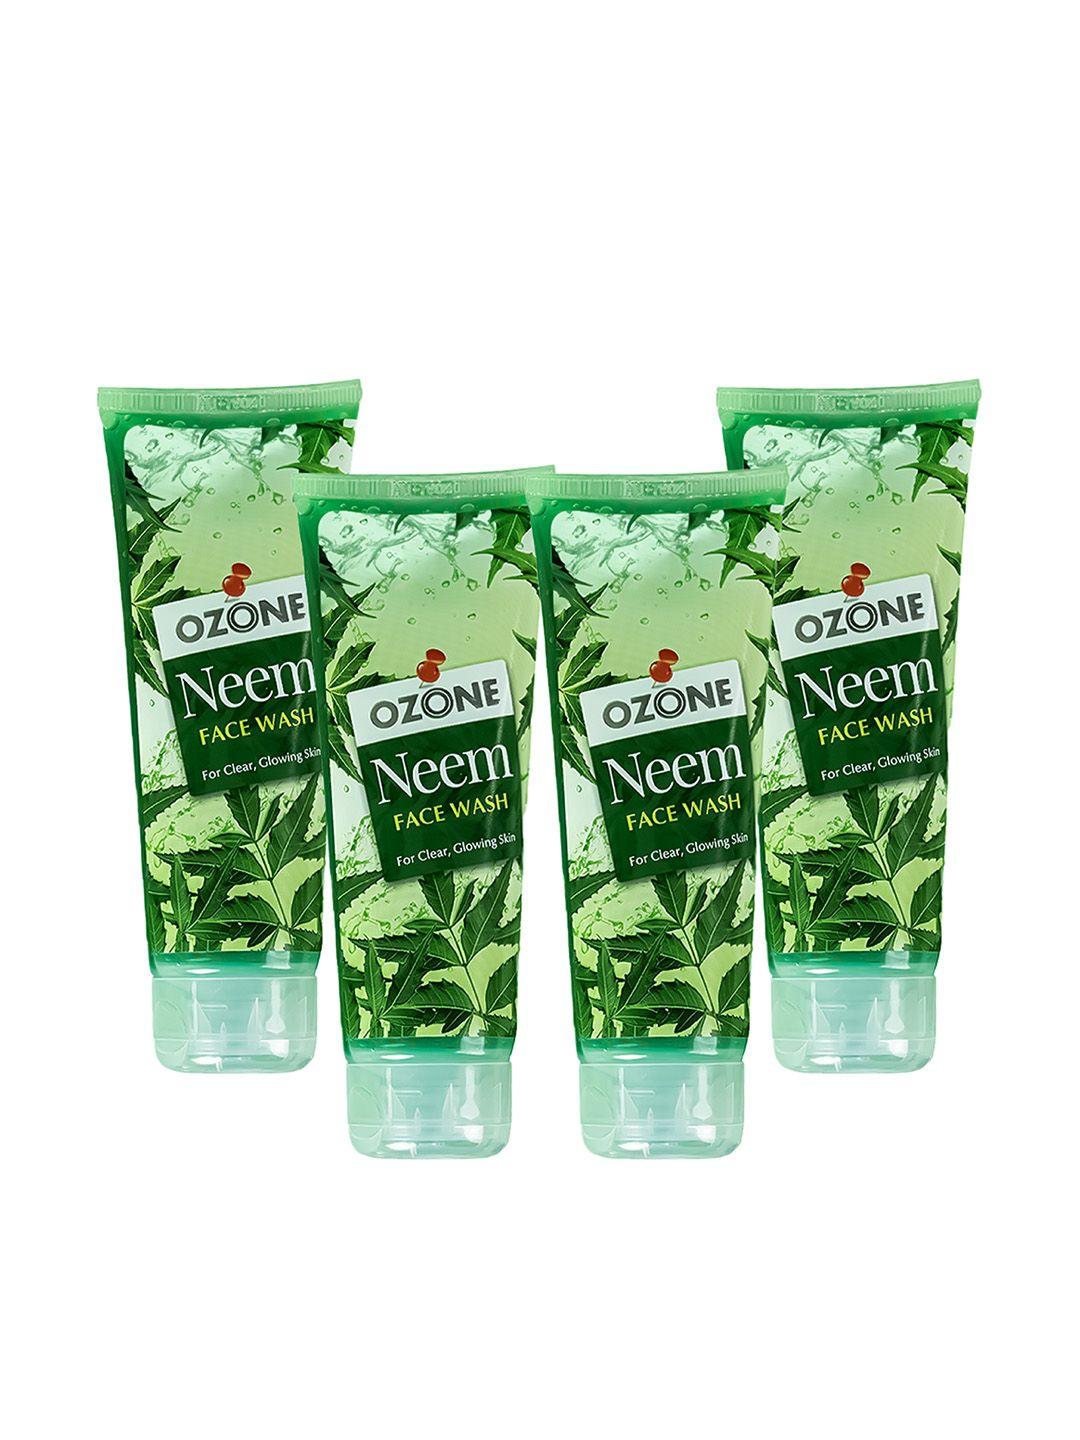 ozone-set-of-4-neem-face-wash-with-aloe-vera-&-lemon-for-acne-&-breakouts---100ml-each